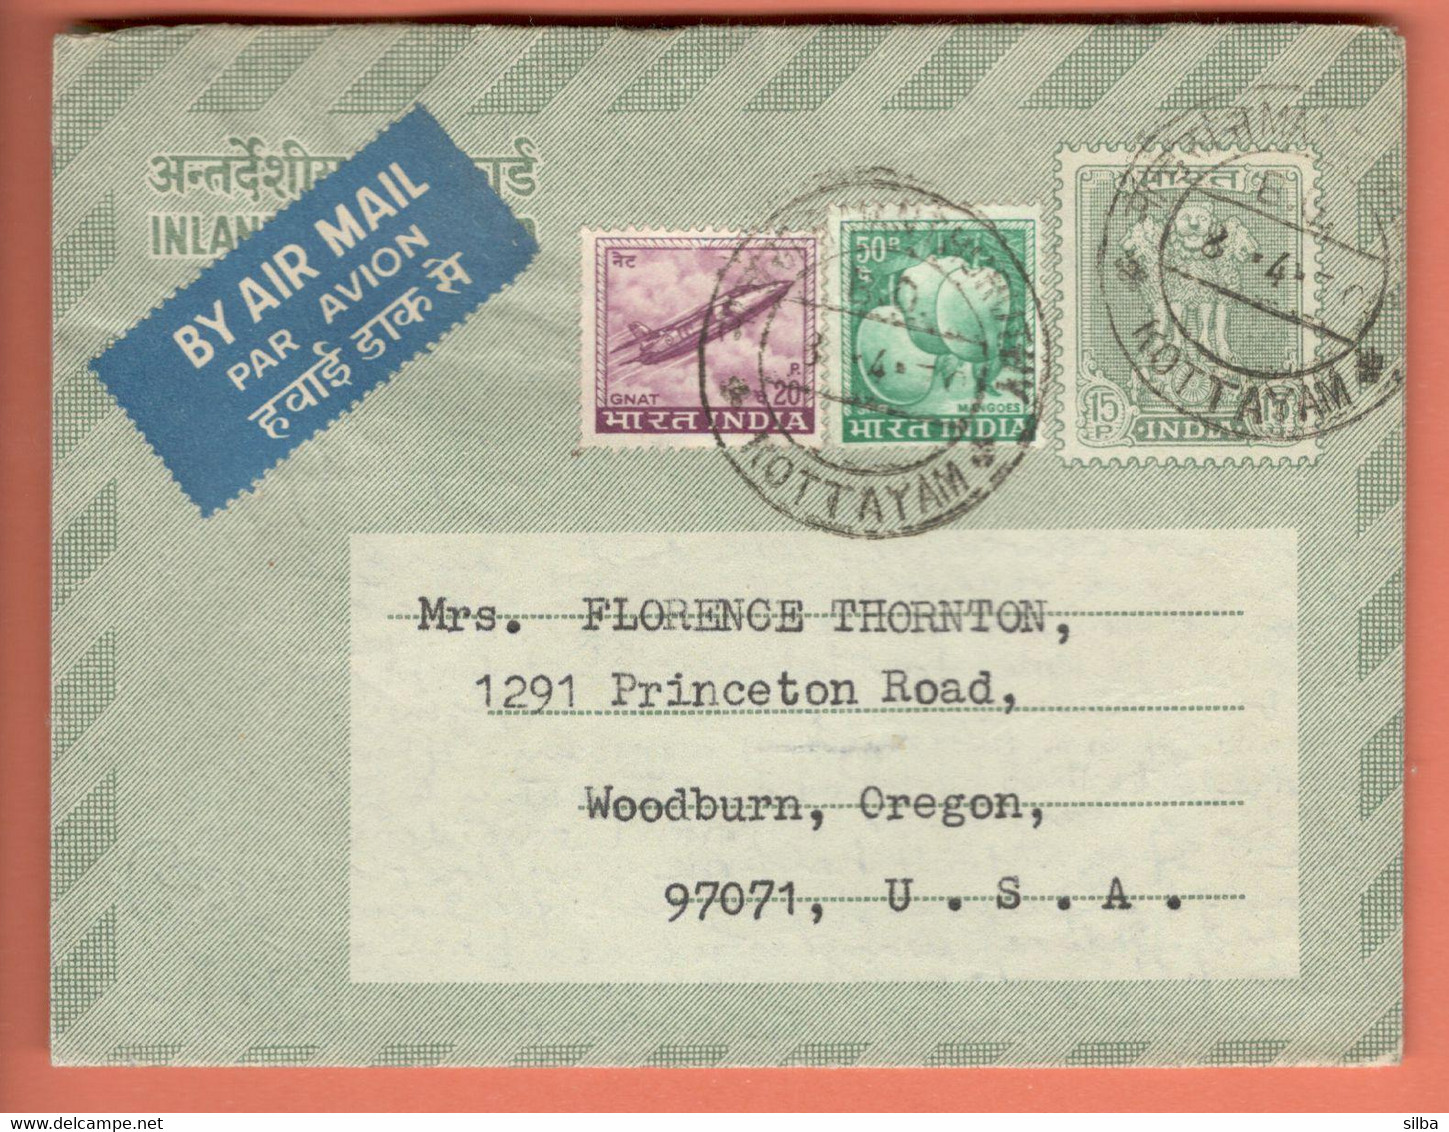 India Inland Letter / Ashoka Pillar, Lions 15p, Postal Stationery / Air Mail - Inland Letter Cards